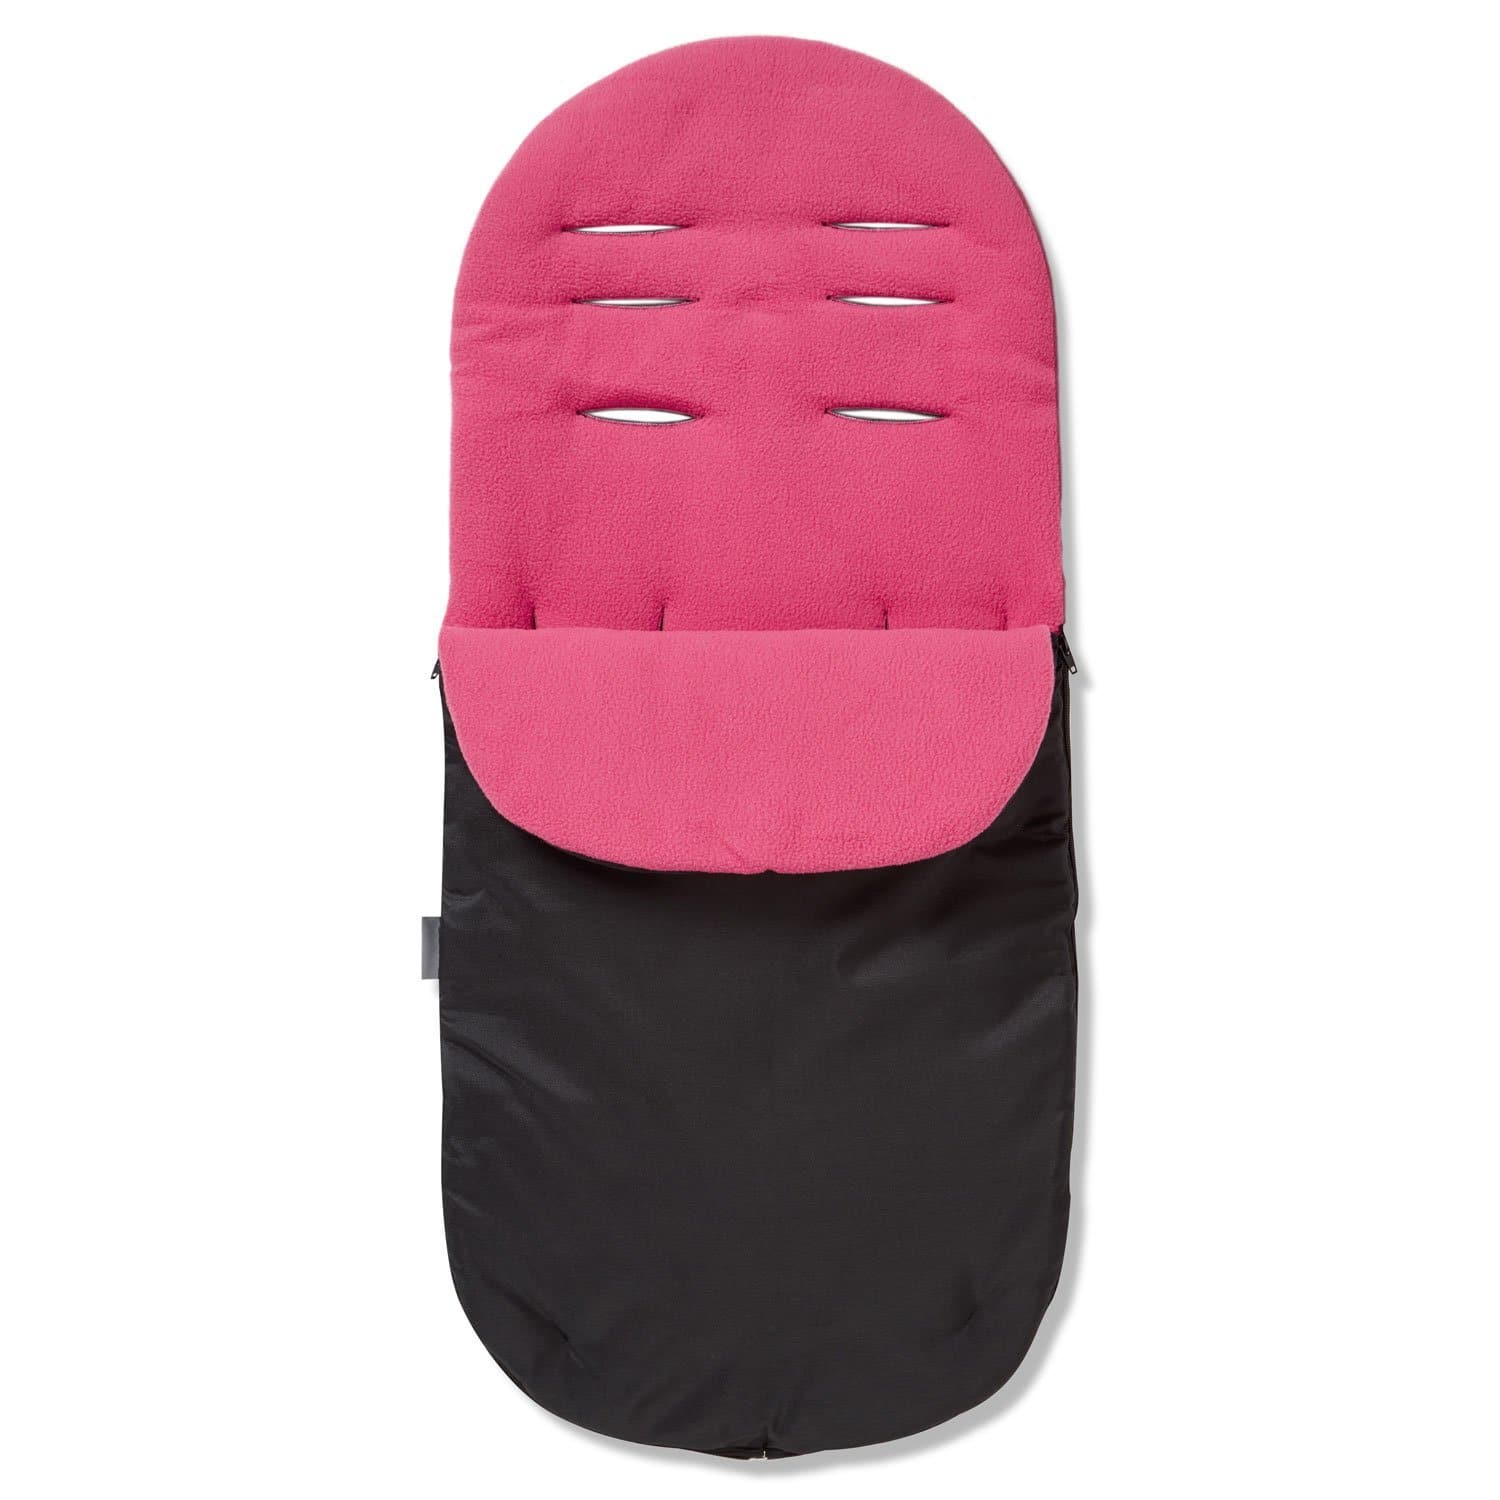 Footmuff / Cosy Toes Compatible with Recaro - Dark Pink / Fits All Models | For Your Little One